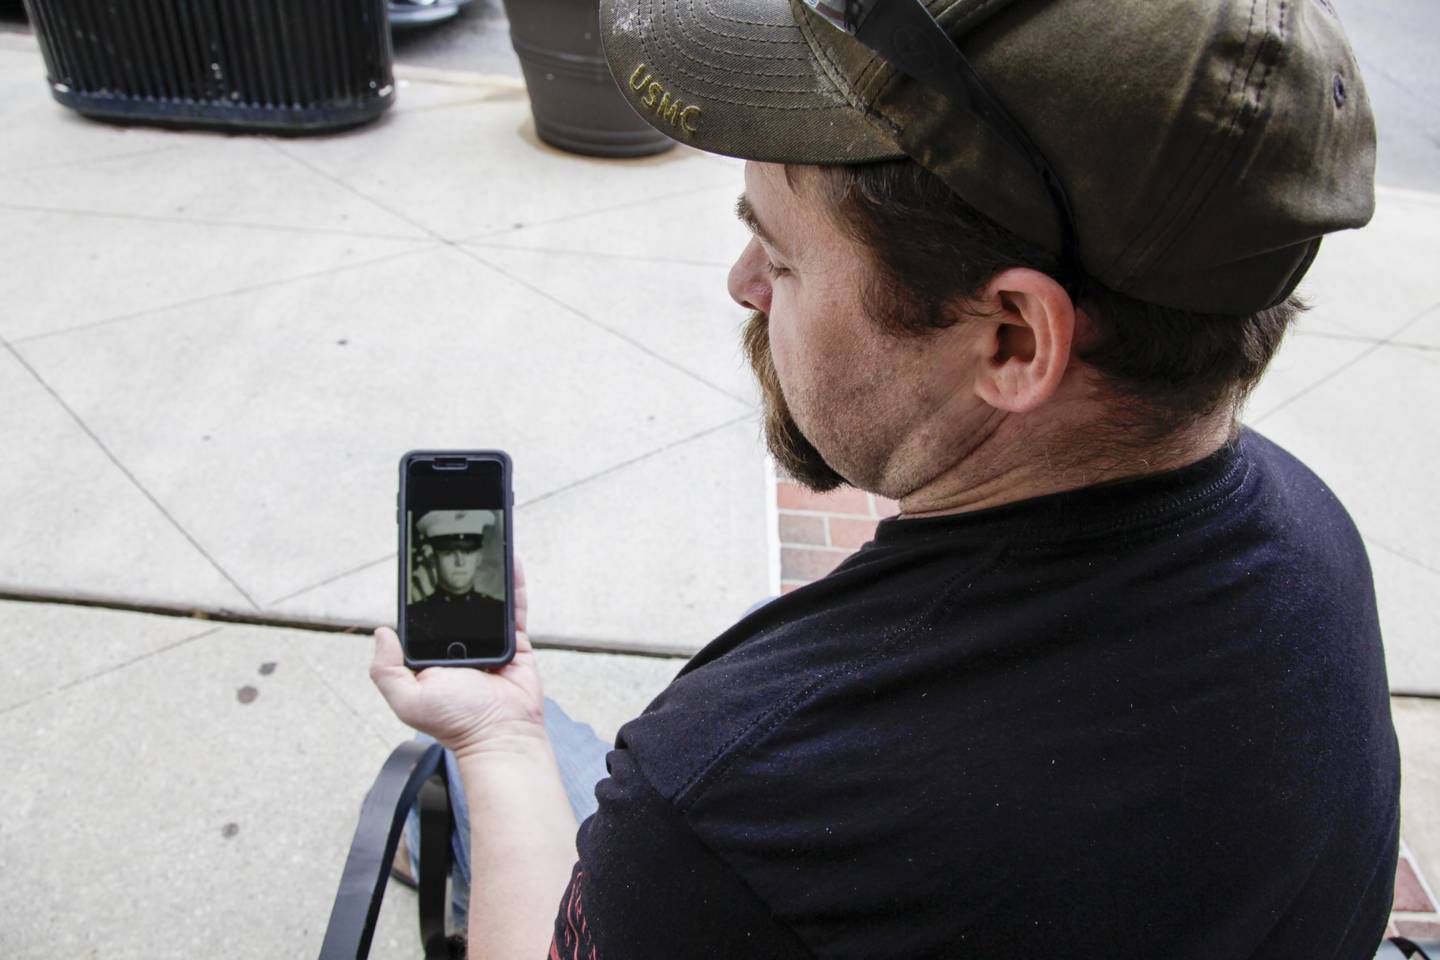 Marine Corps veteran Chad Sneary, 43, shows a photo of his 19-year-old self in uniform on Thursday, April 30, 2020, in Mooresville, N.C.